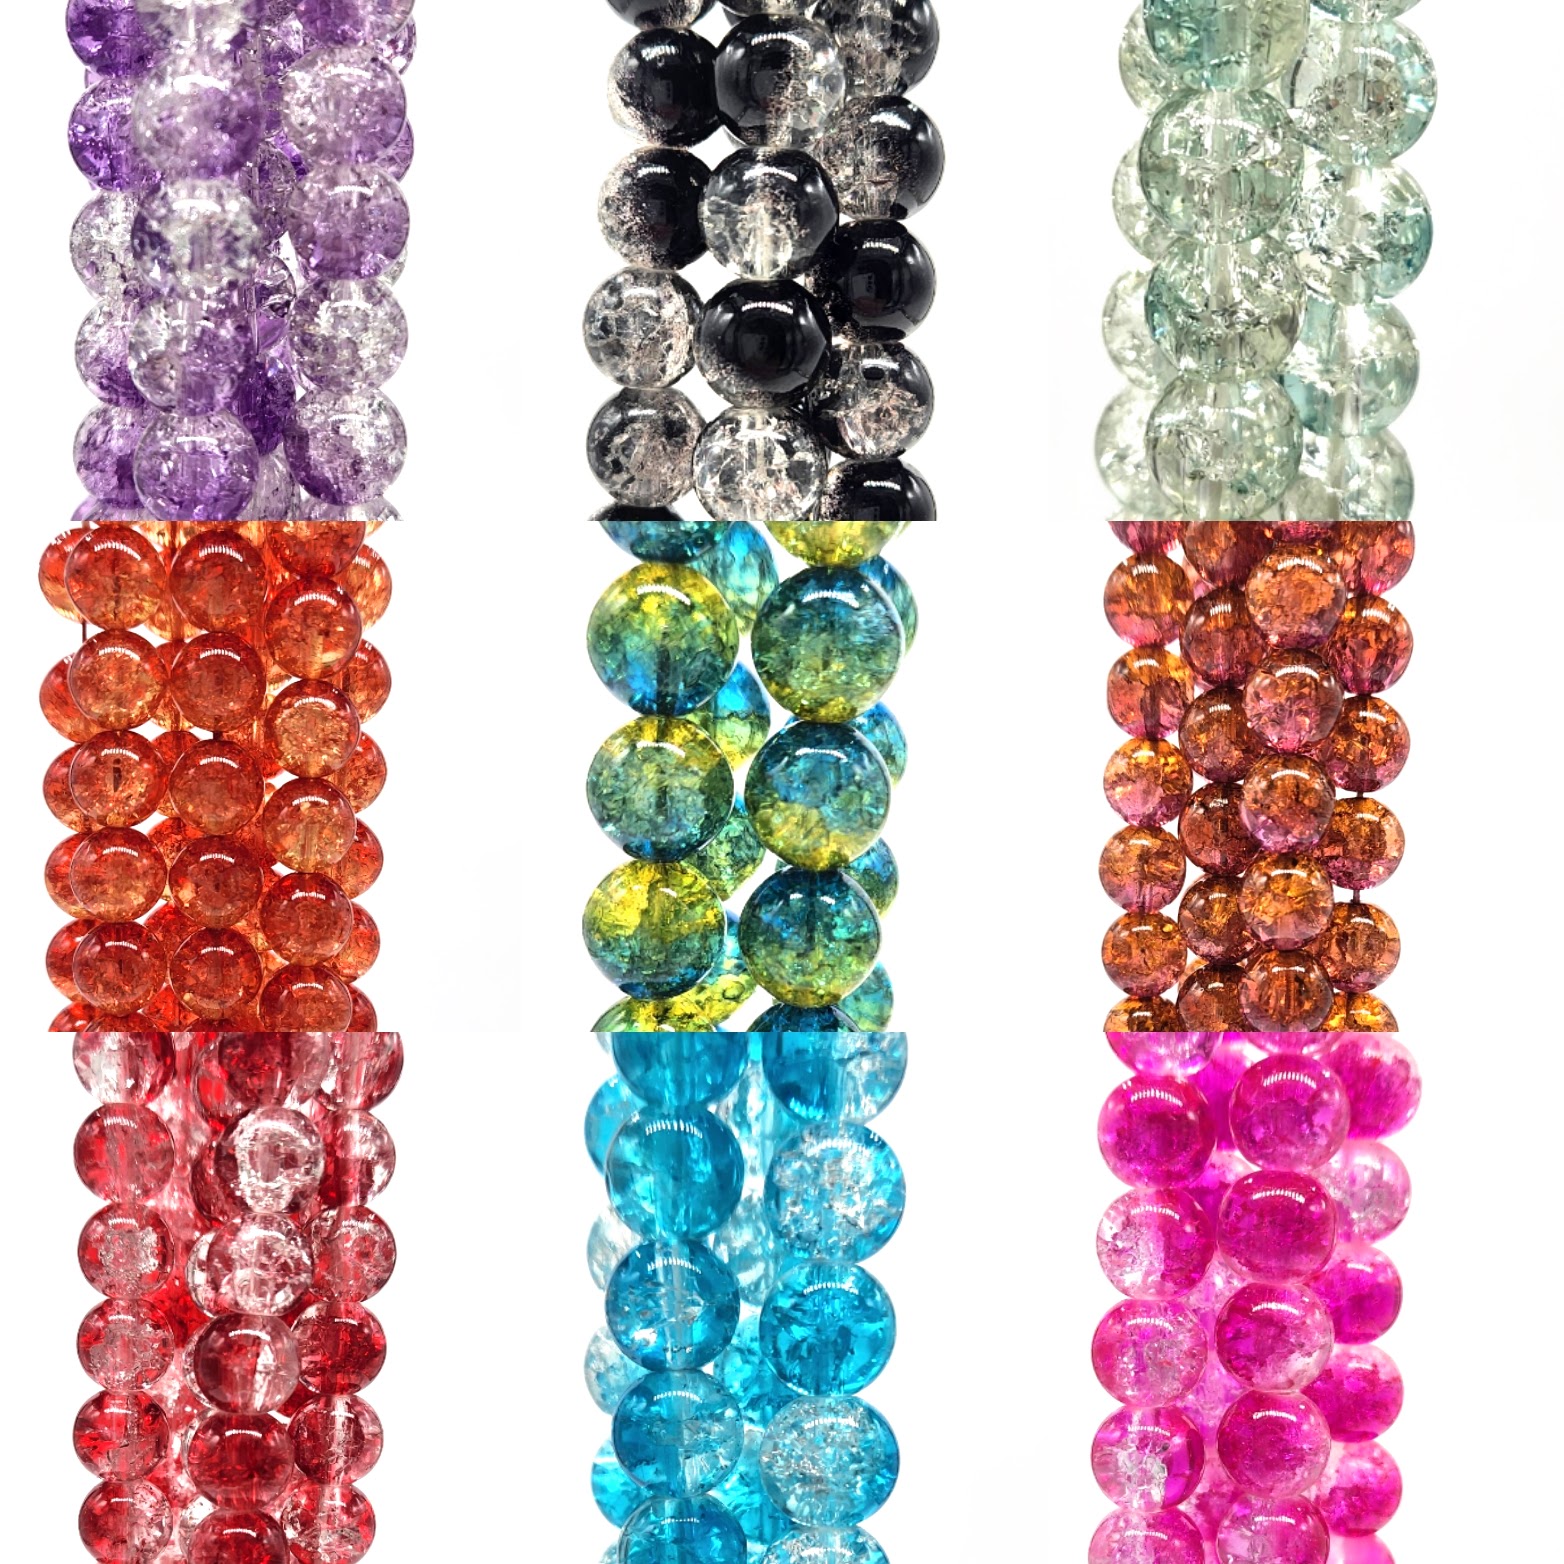 100pcs 10mm Crackle Beads 10 Color Glass Round Beads Crystal